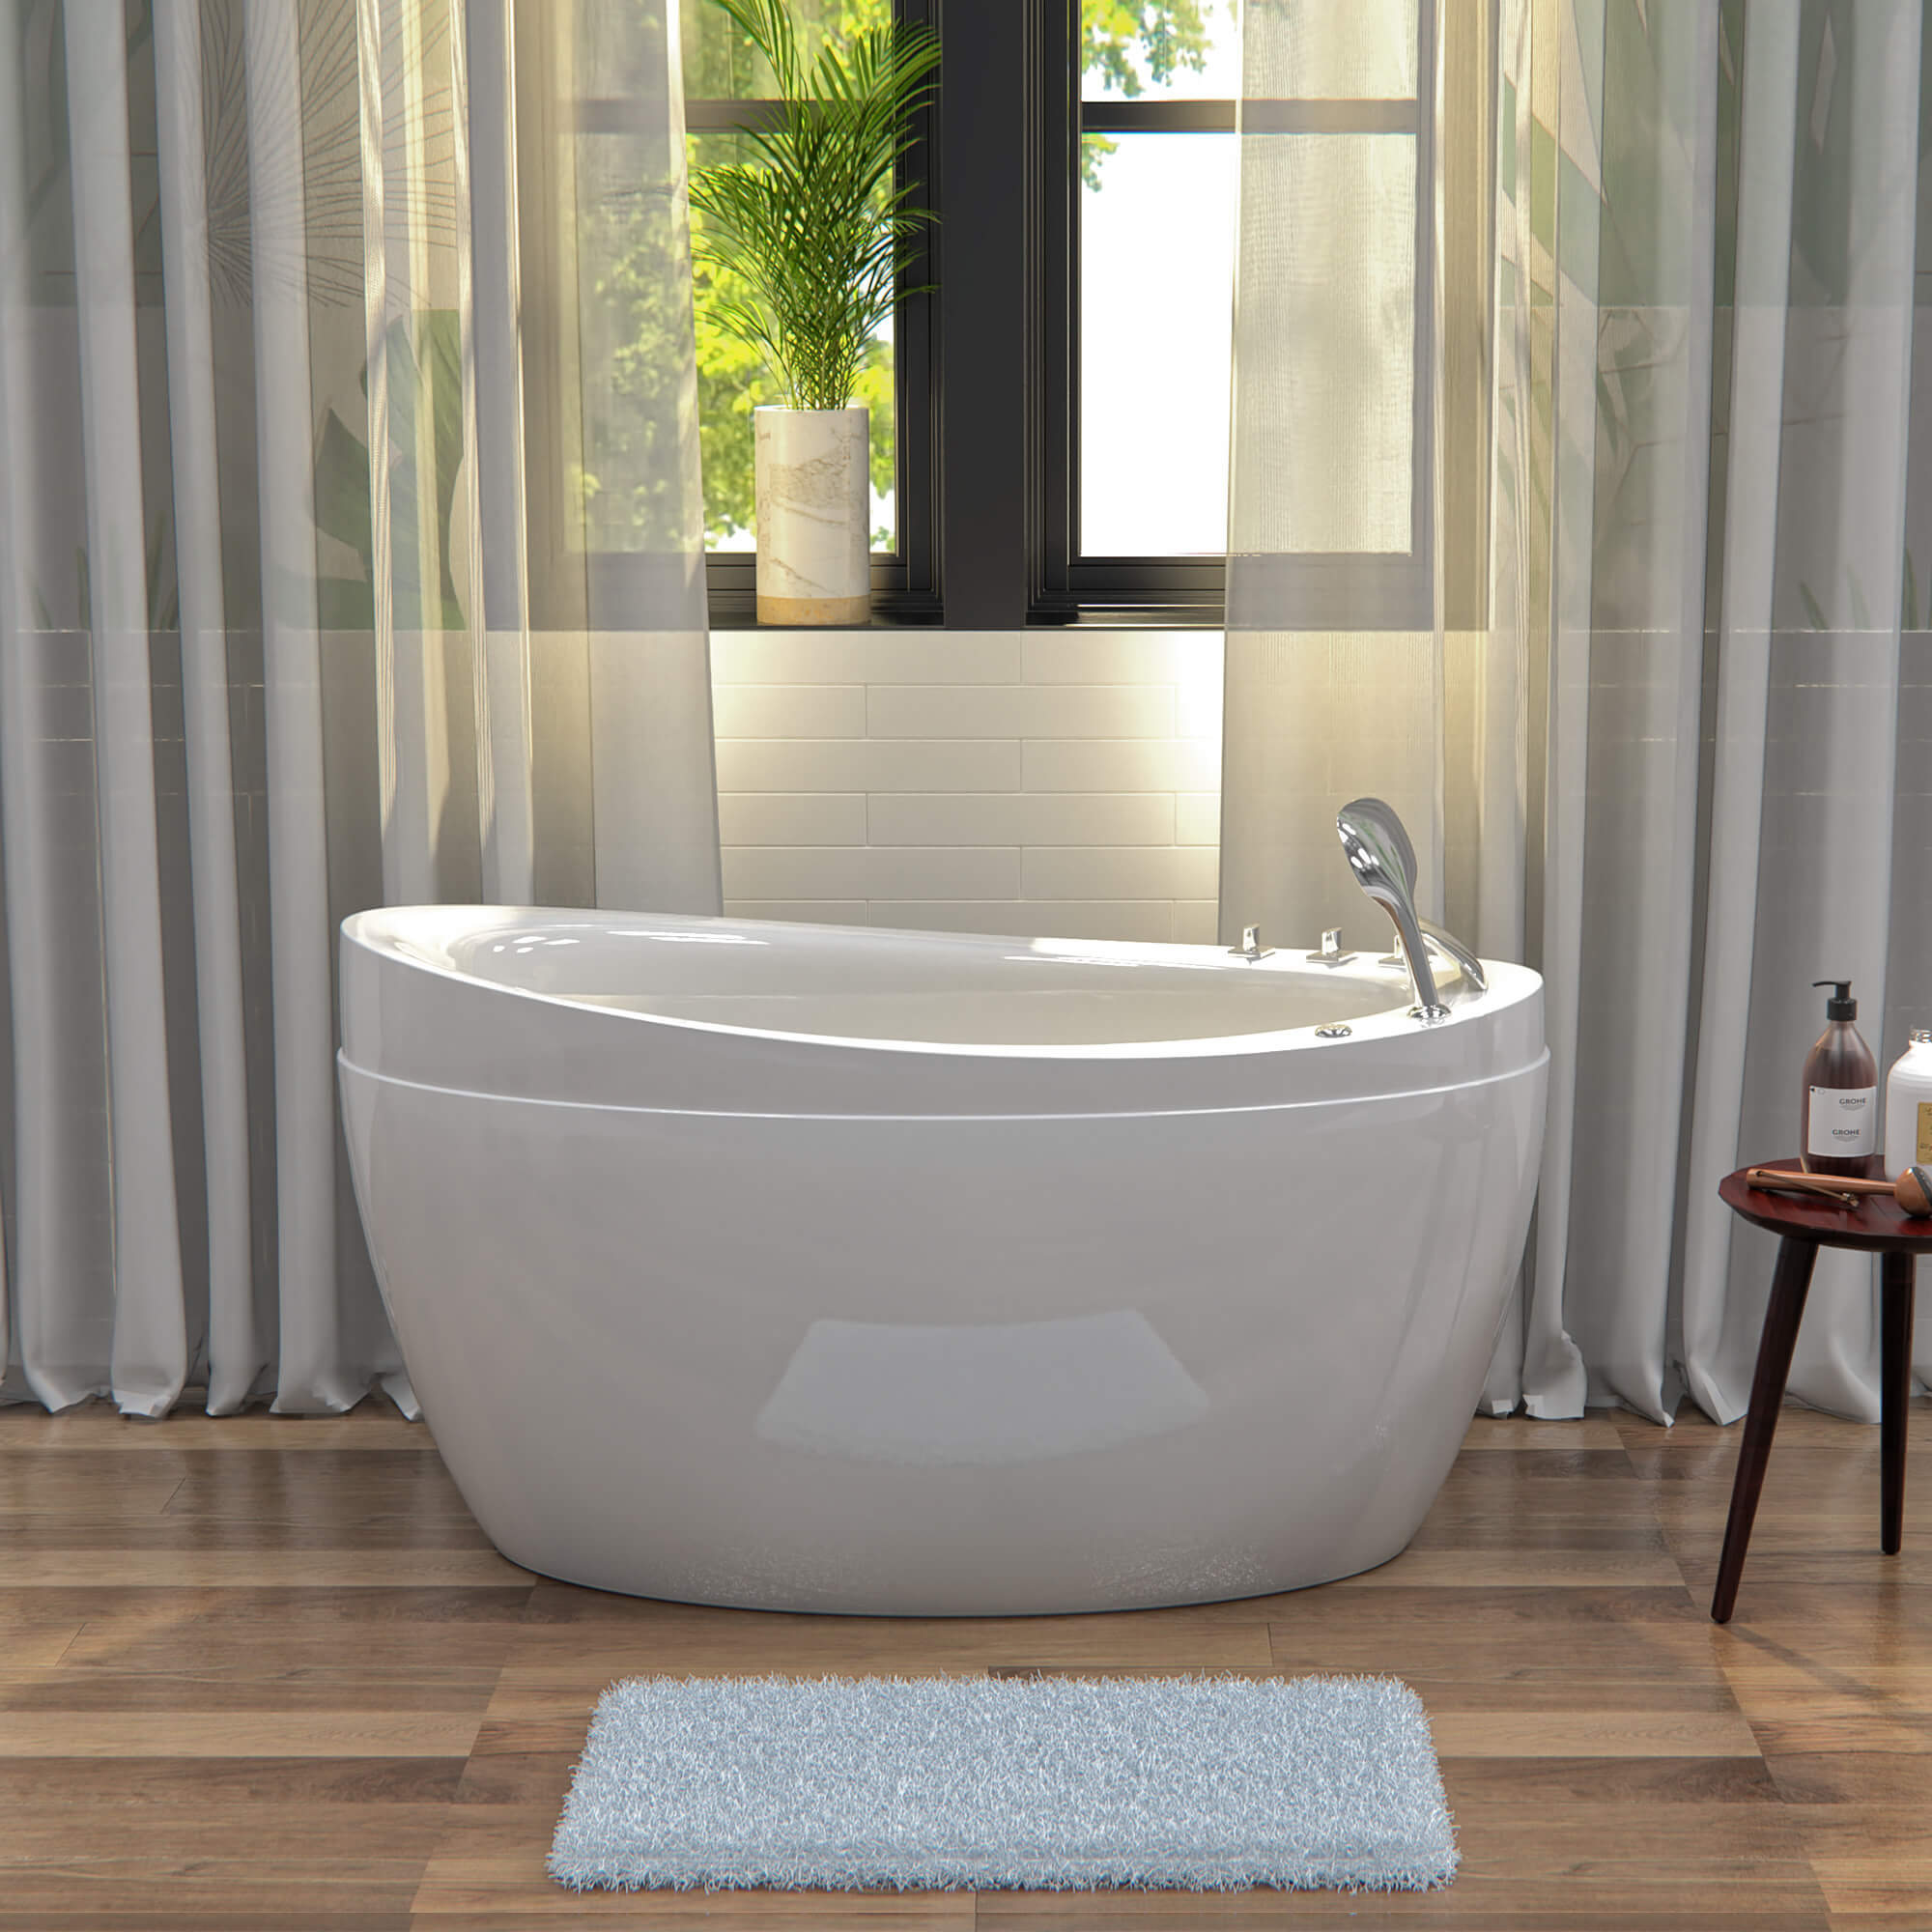 Empava | 59JT011 59 in. Freestanding Japanese-Style Air Massage Tub